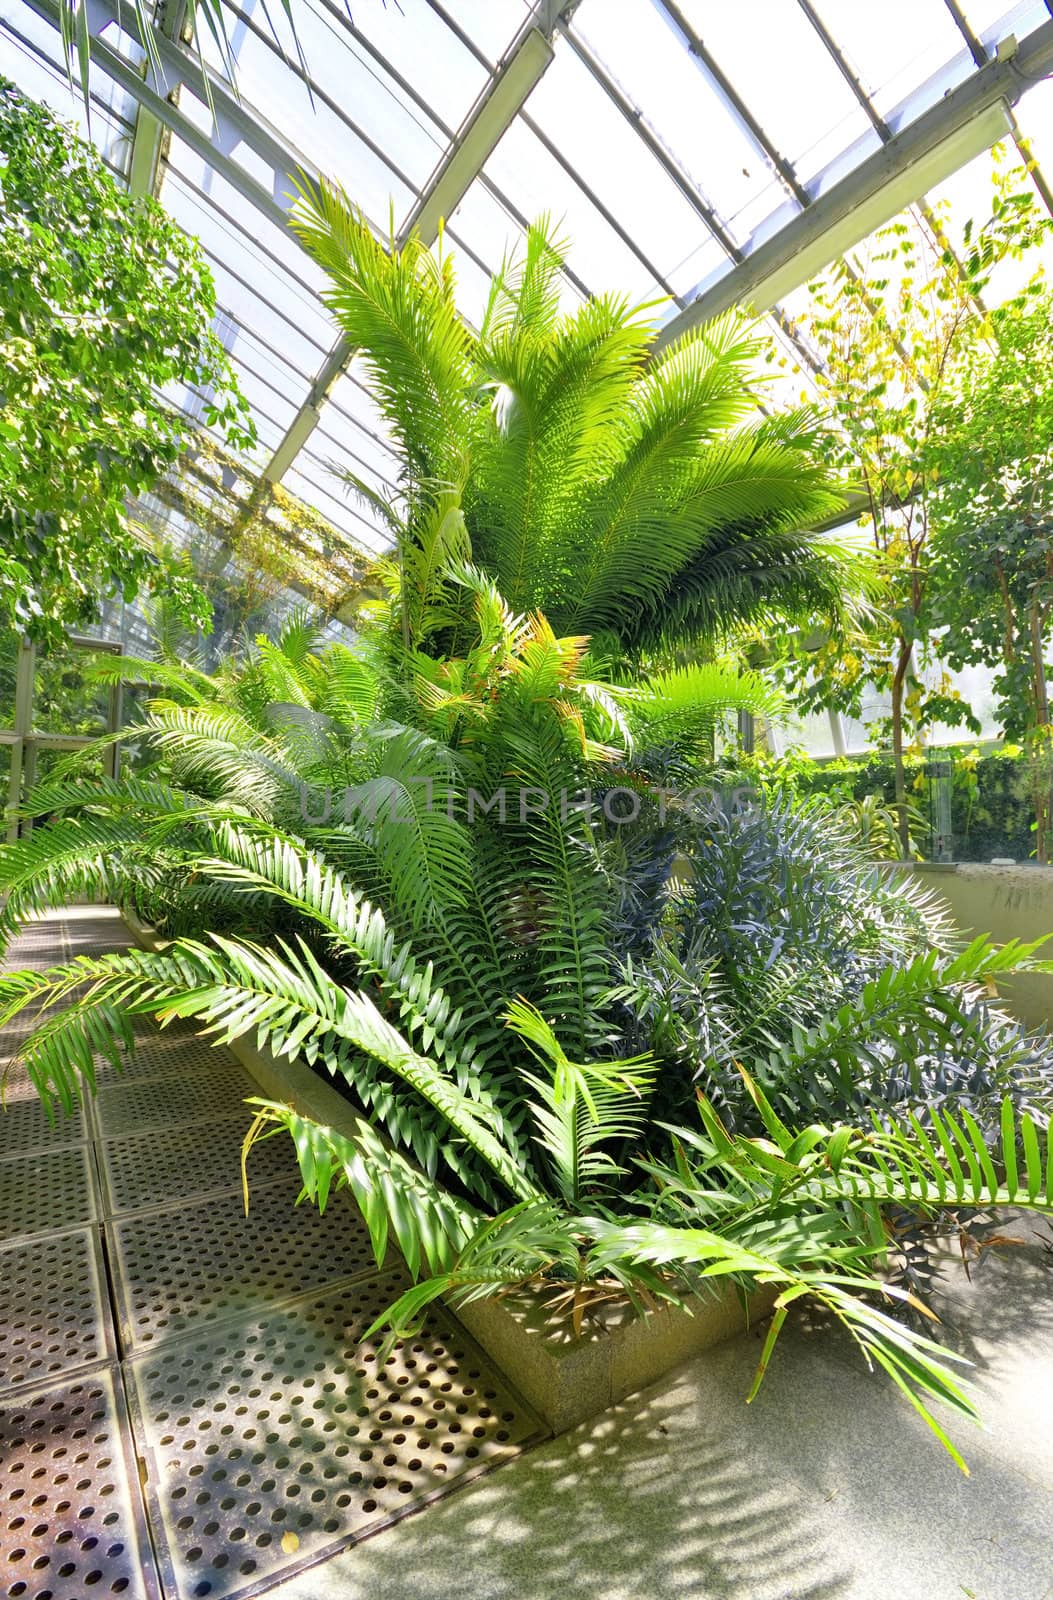 Tropical Plants in a greenhouse at botanic garden, Madrid, Spain.